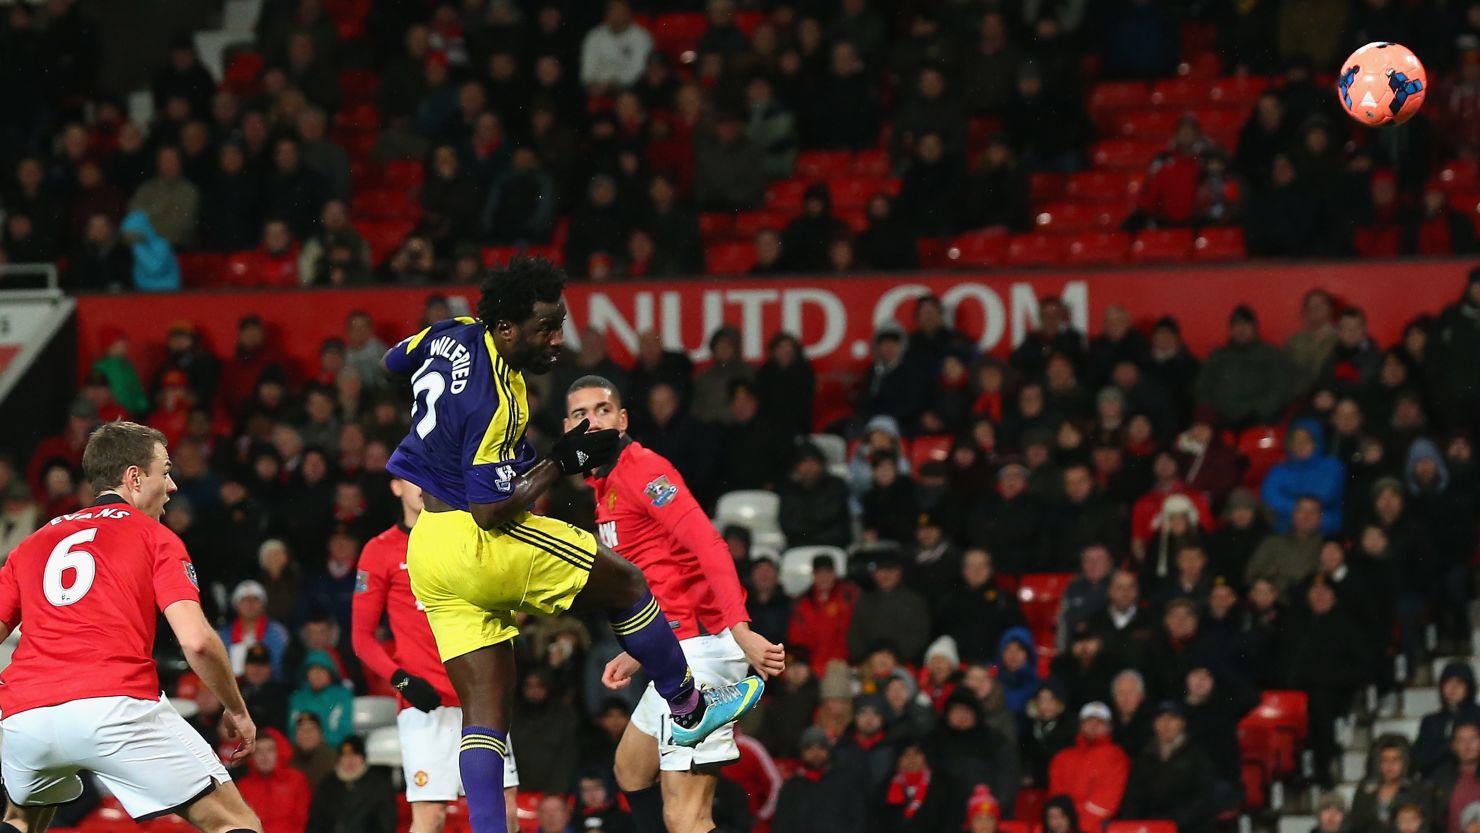 Wilfried Bony continued his good form, scoring the winner for Swansea as it upset Manchester United in the FA Cup. 